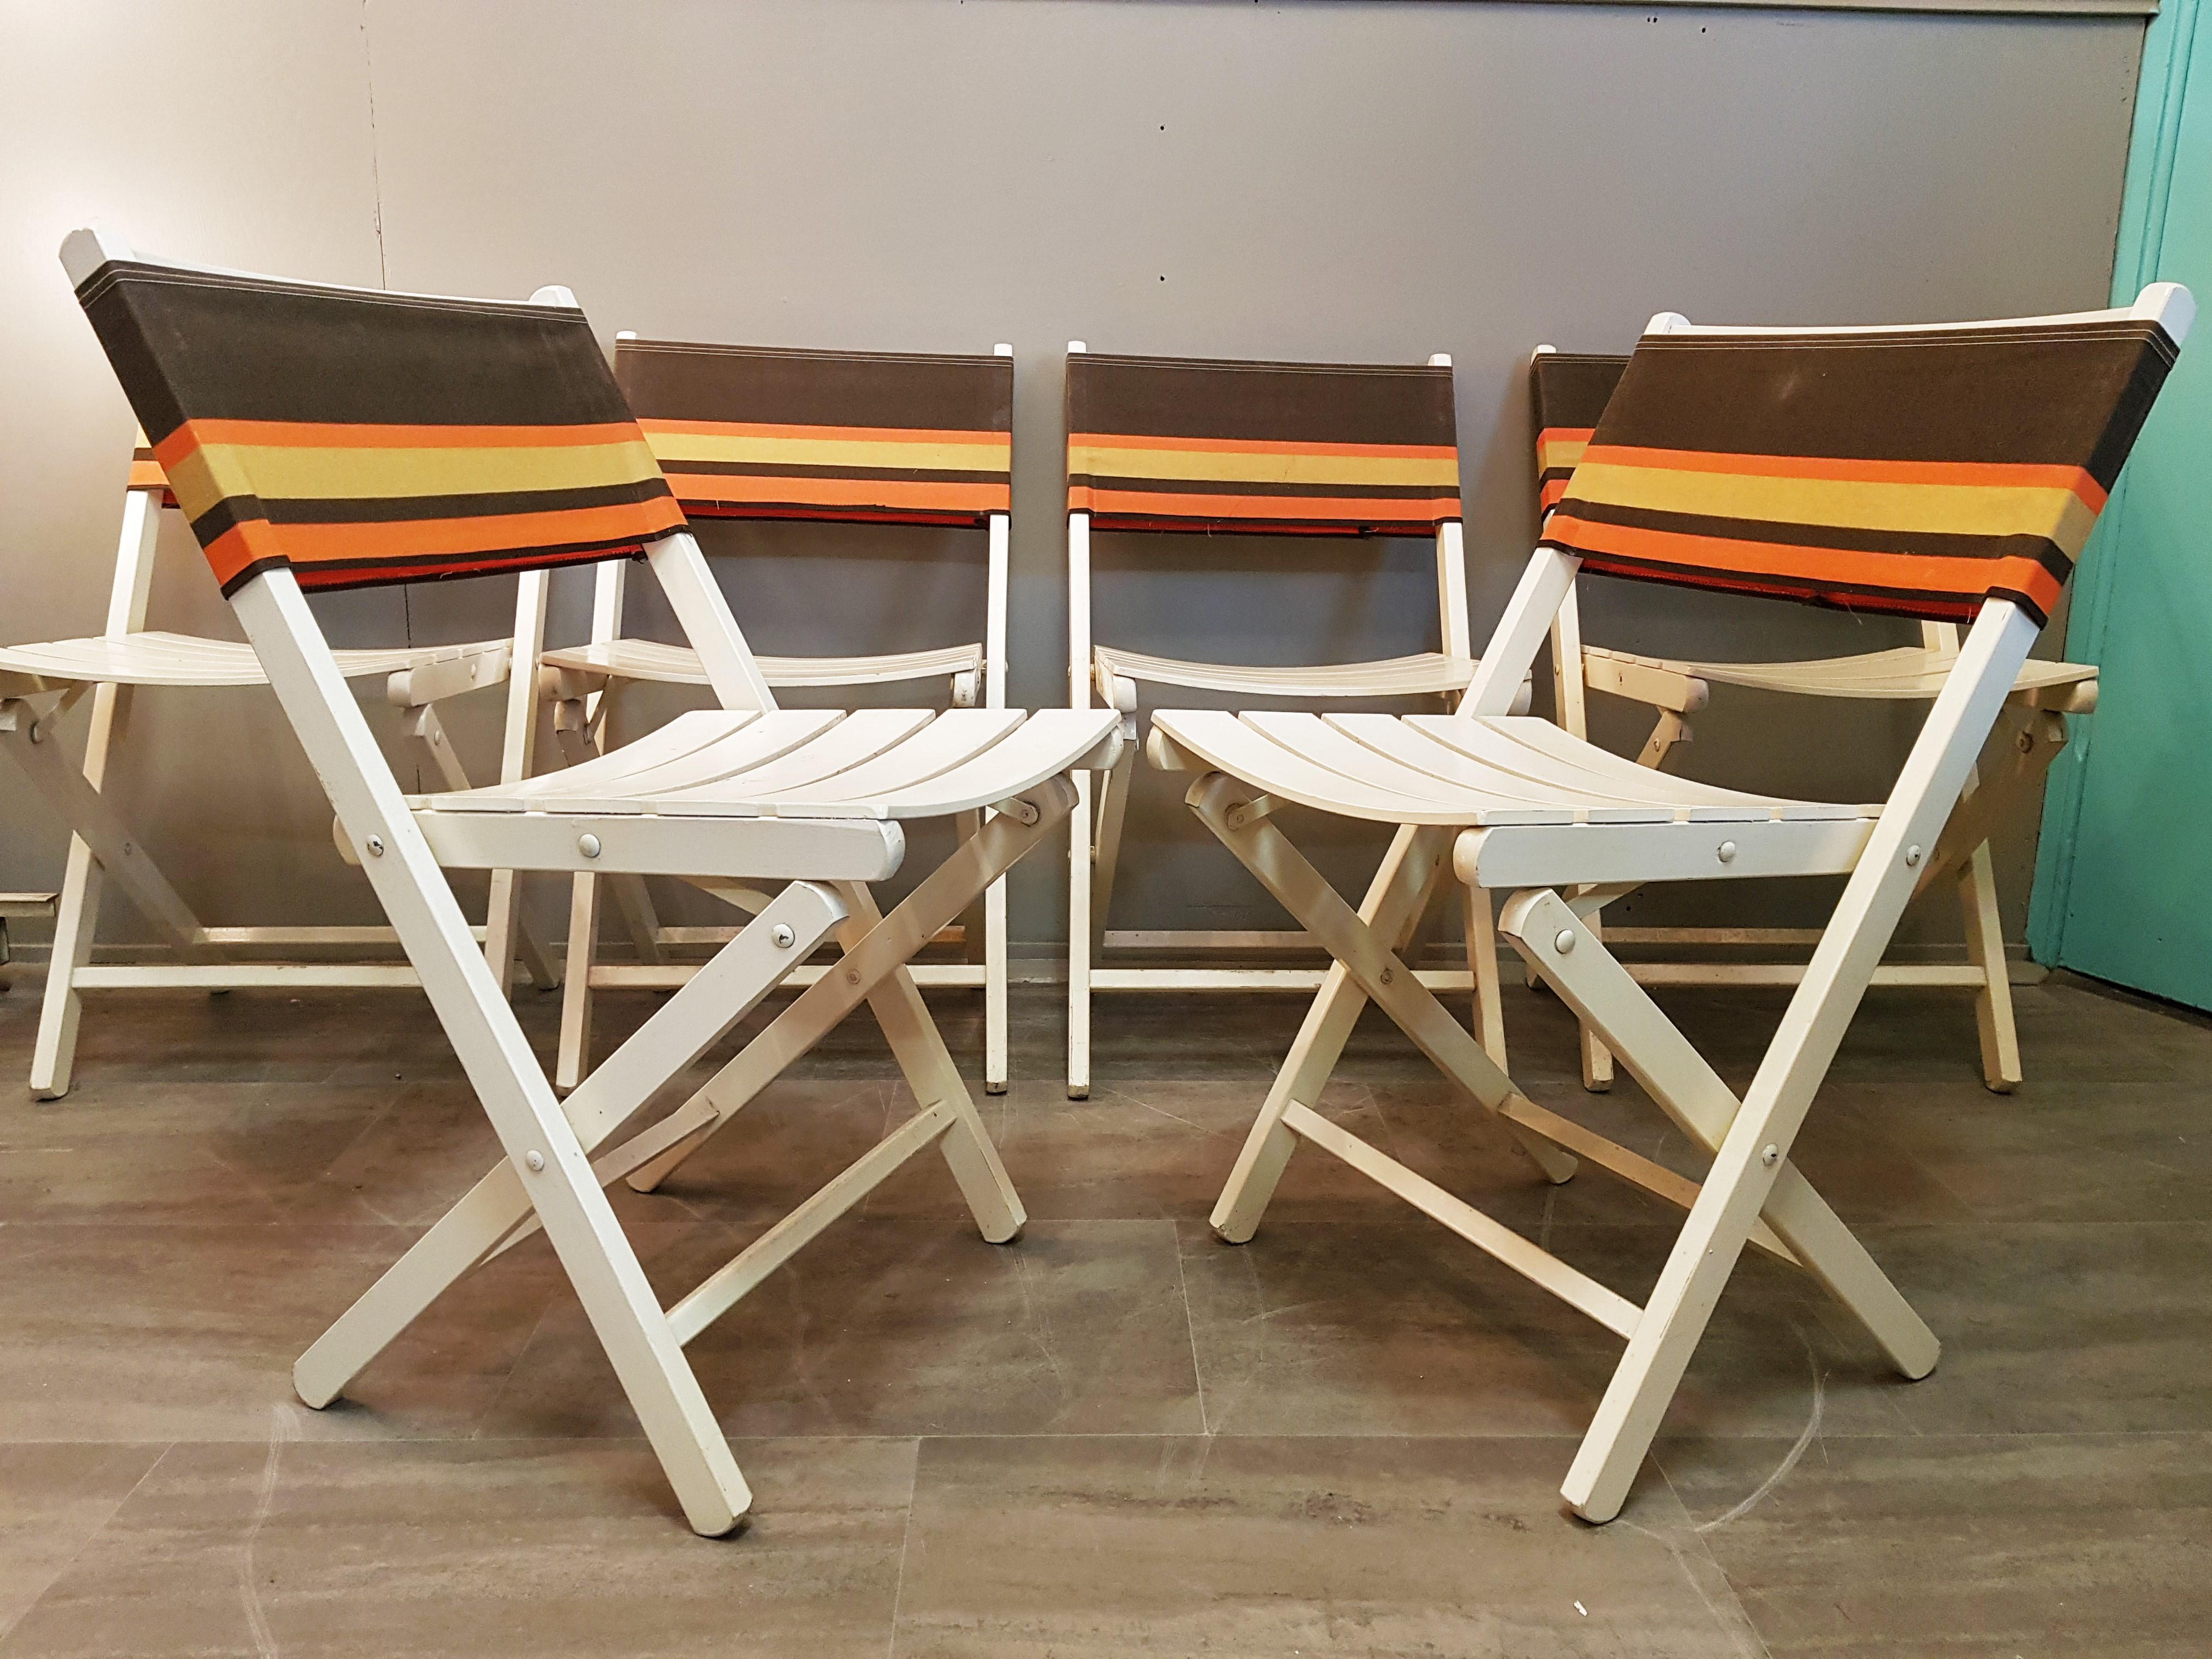 Boho Chic Set of 6 Midcentury Folding Chairs, France, 1960s For Sale 2